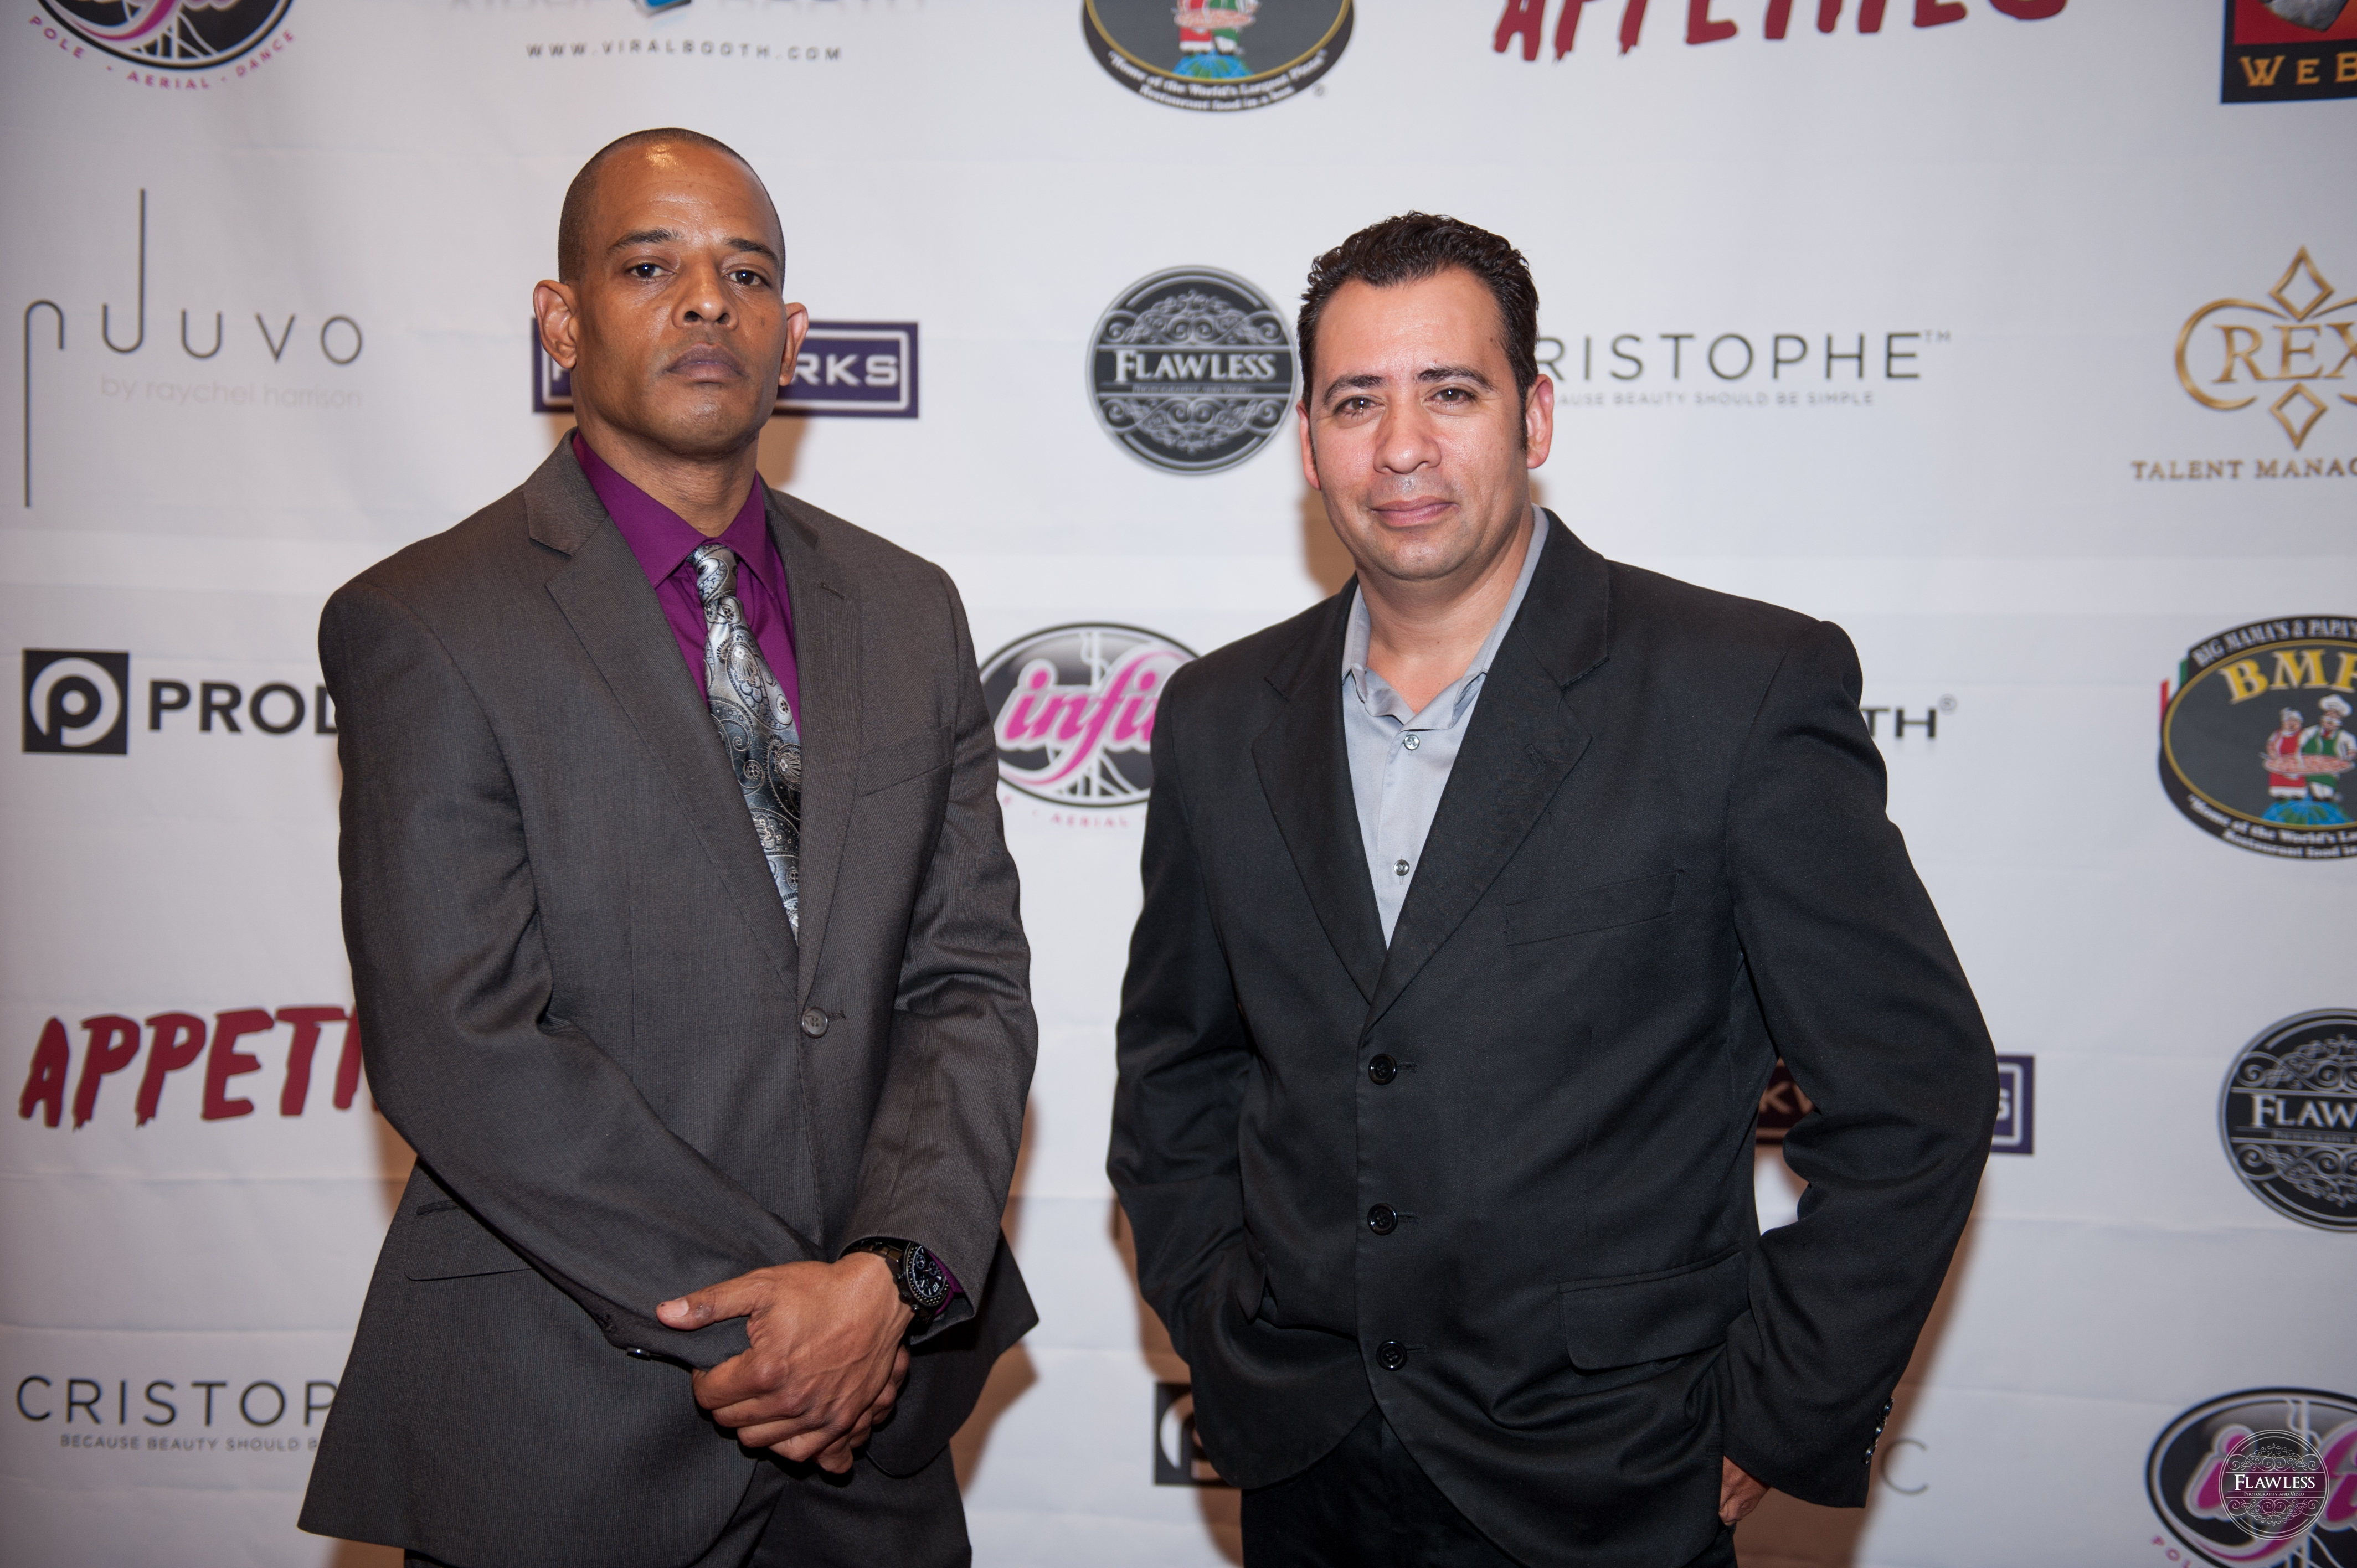 With Actor Anthony Ray @ The Premier for The Movie Appetites - Starring Lauren Parkinson Cruze